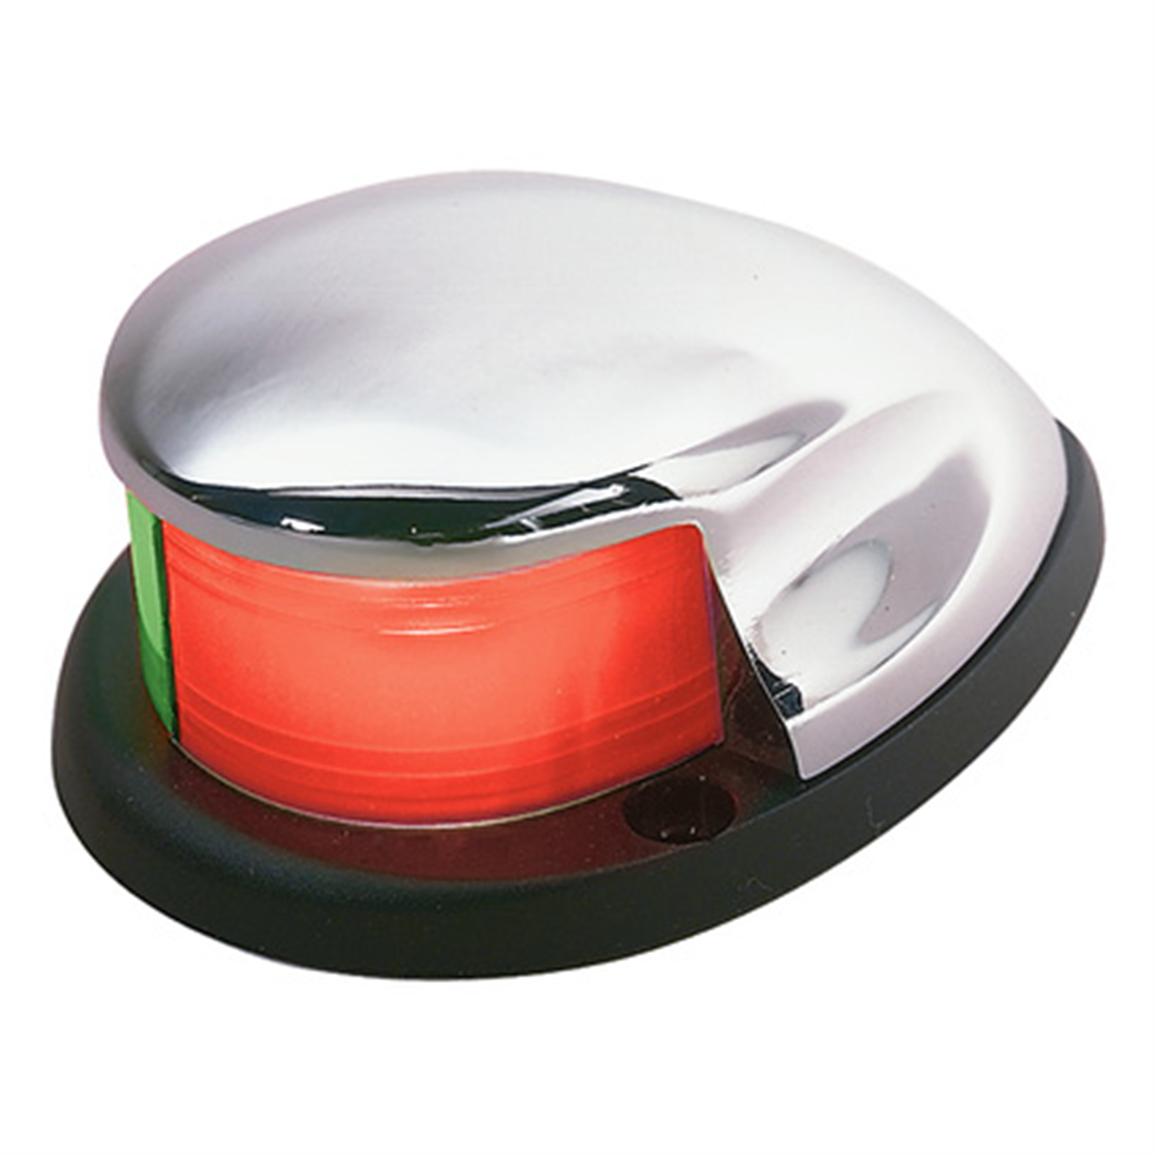 Seachoice Red & Green Bow Light - 198741, Boat Lighting at Sportsman's ...